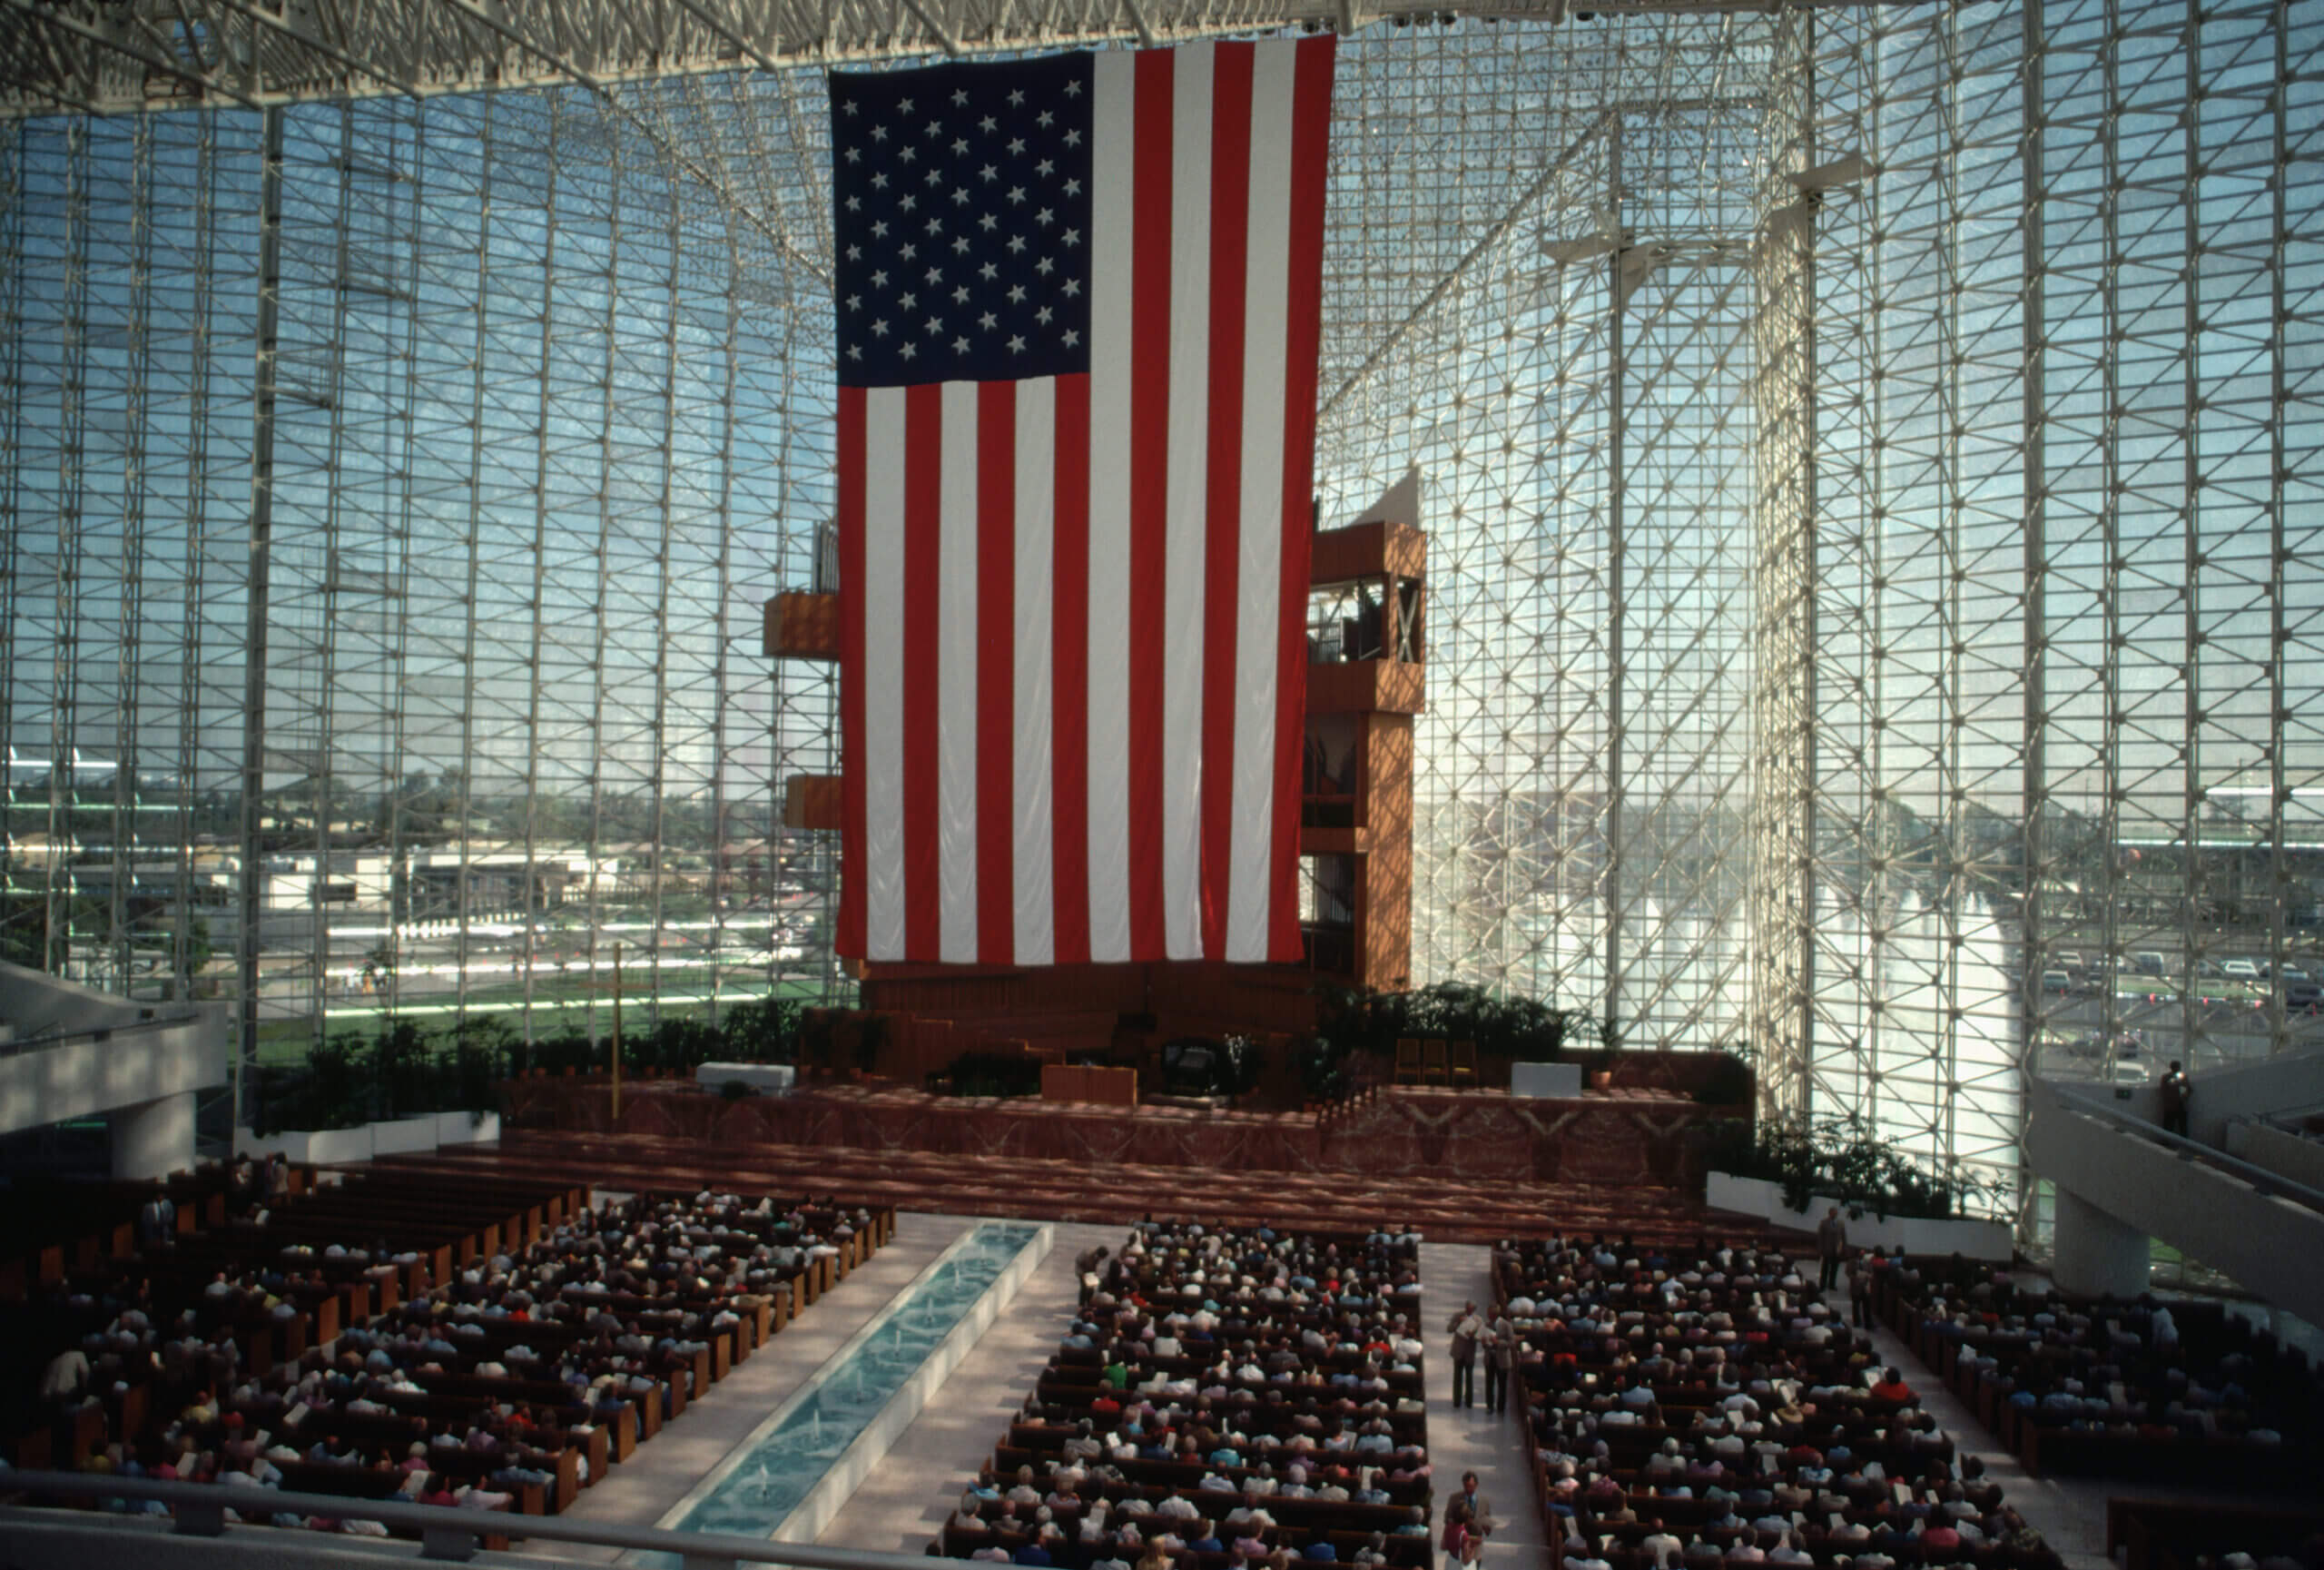 Congregation of the Crystal Cathedral gathers under the American flag. (Vince Streano/Corbis Documentary via Getty Images)